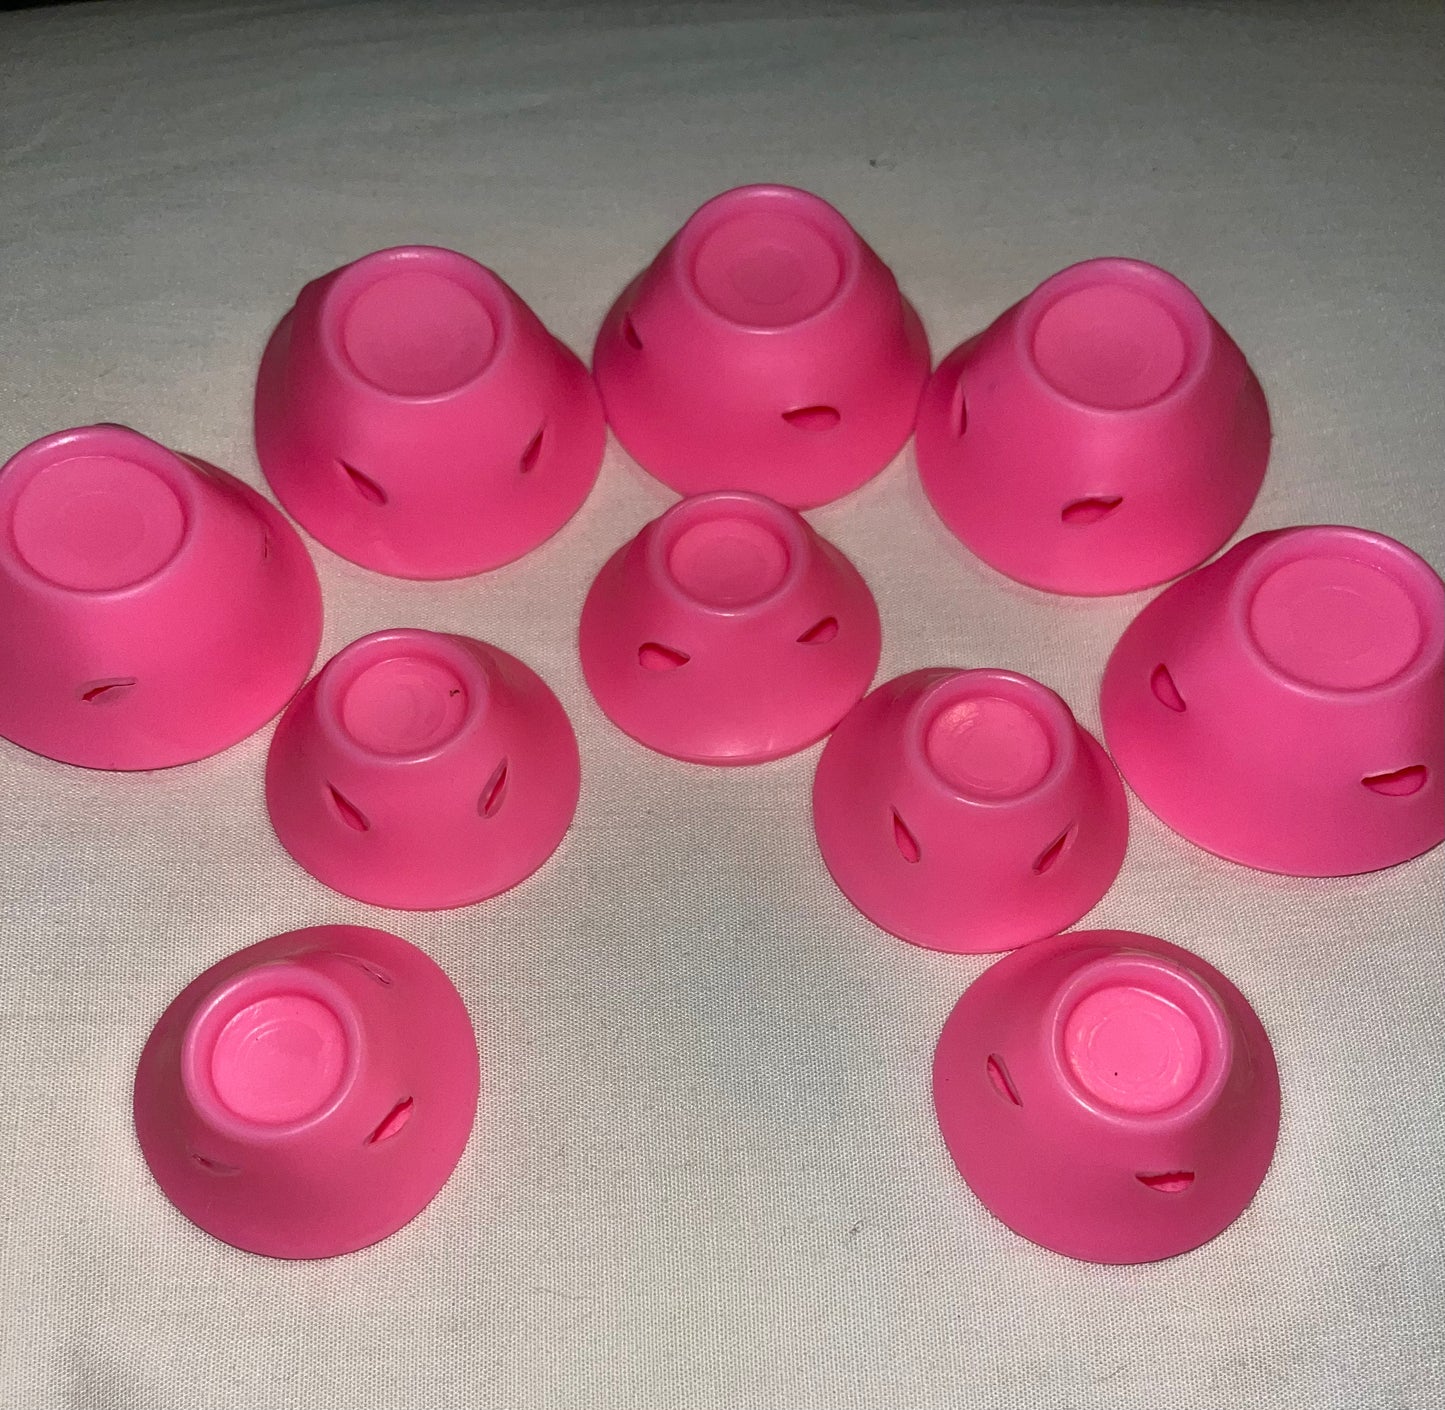 Silicone Hair Rollers